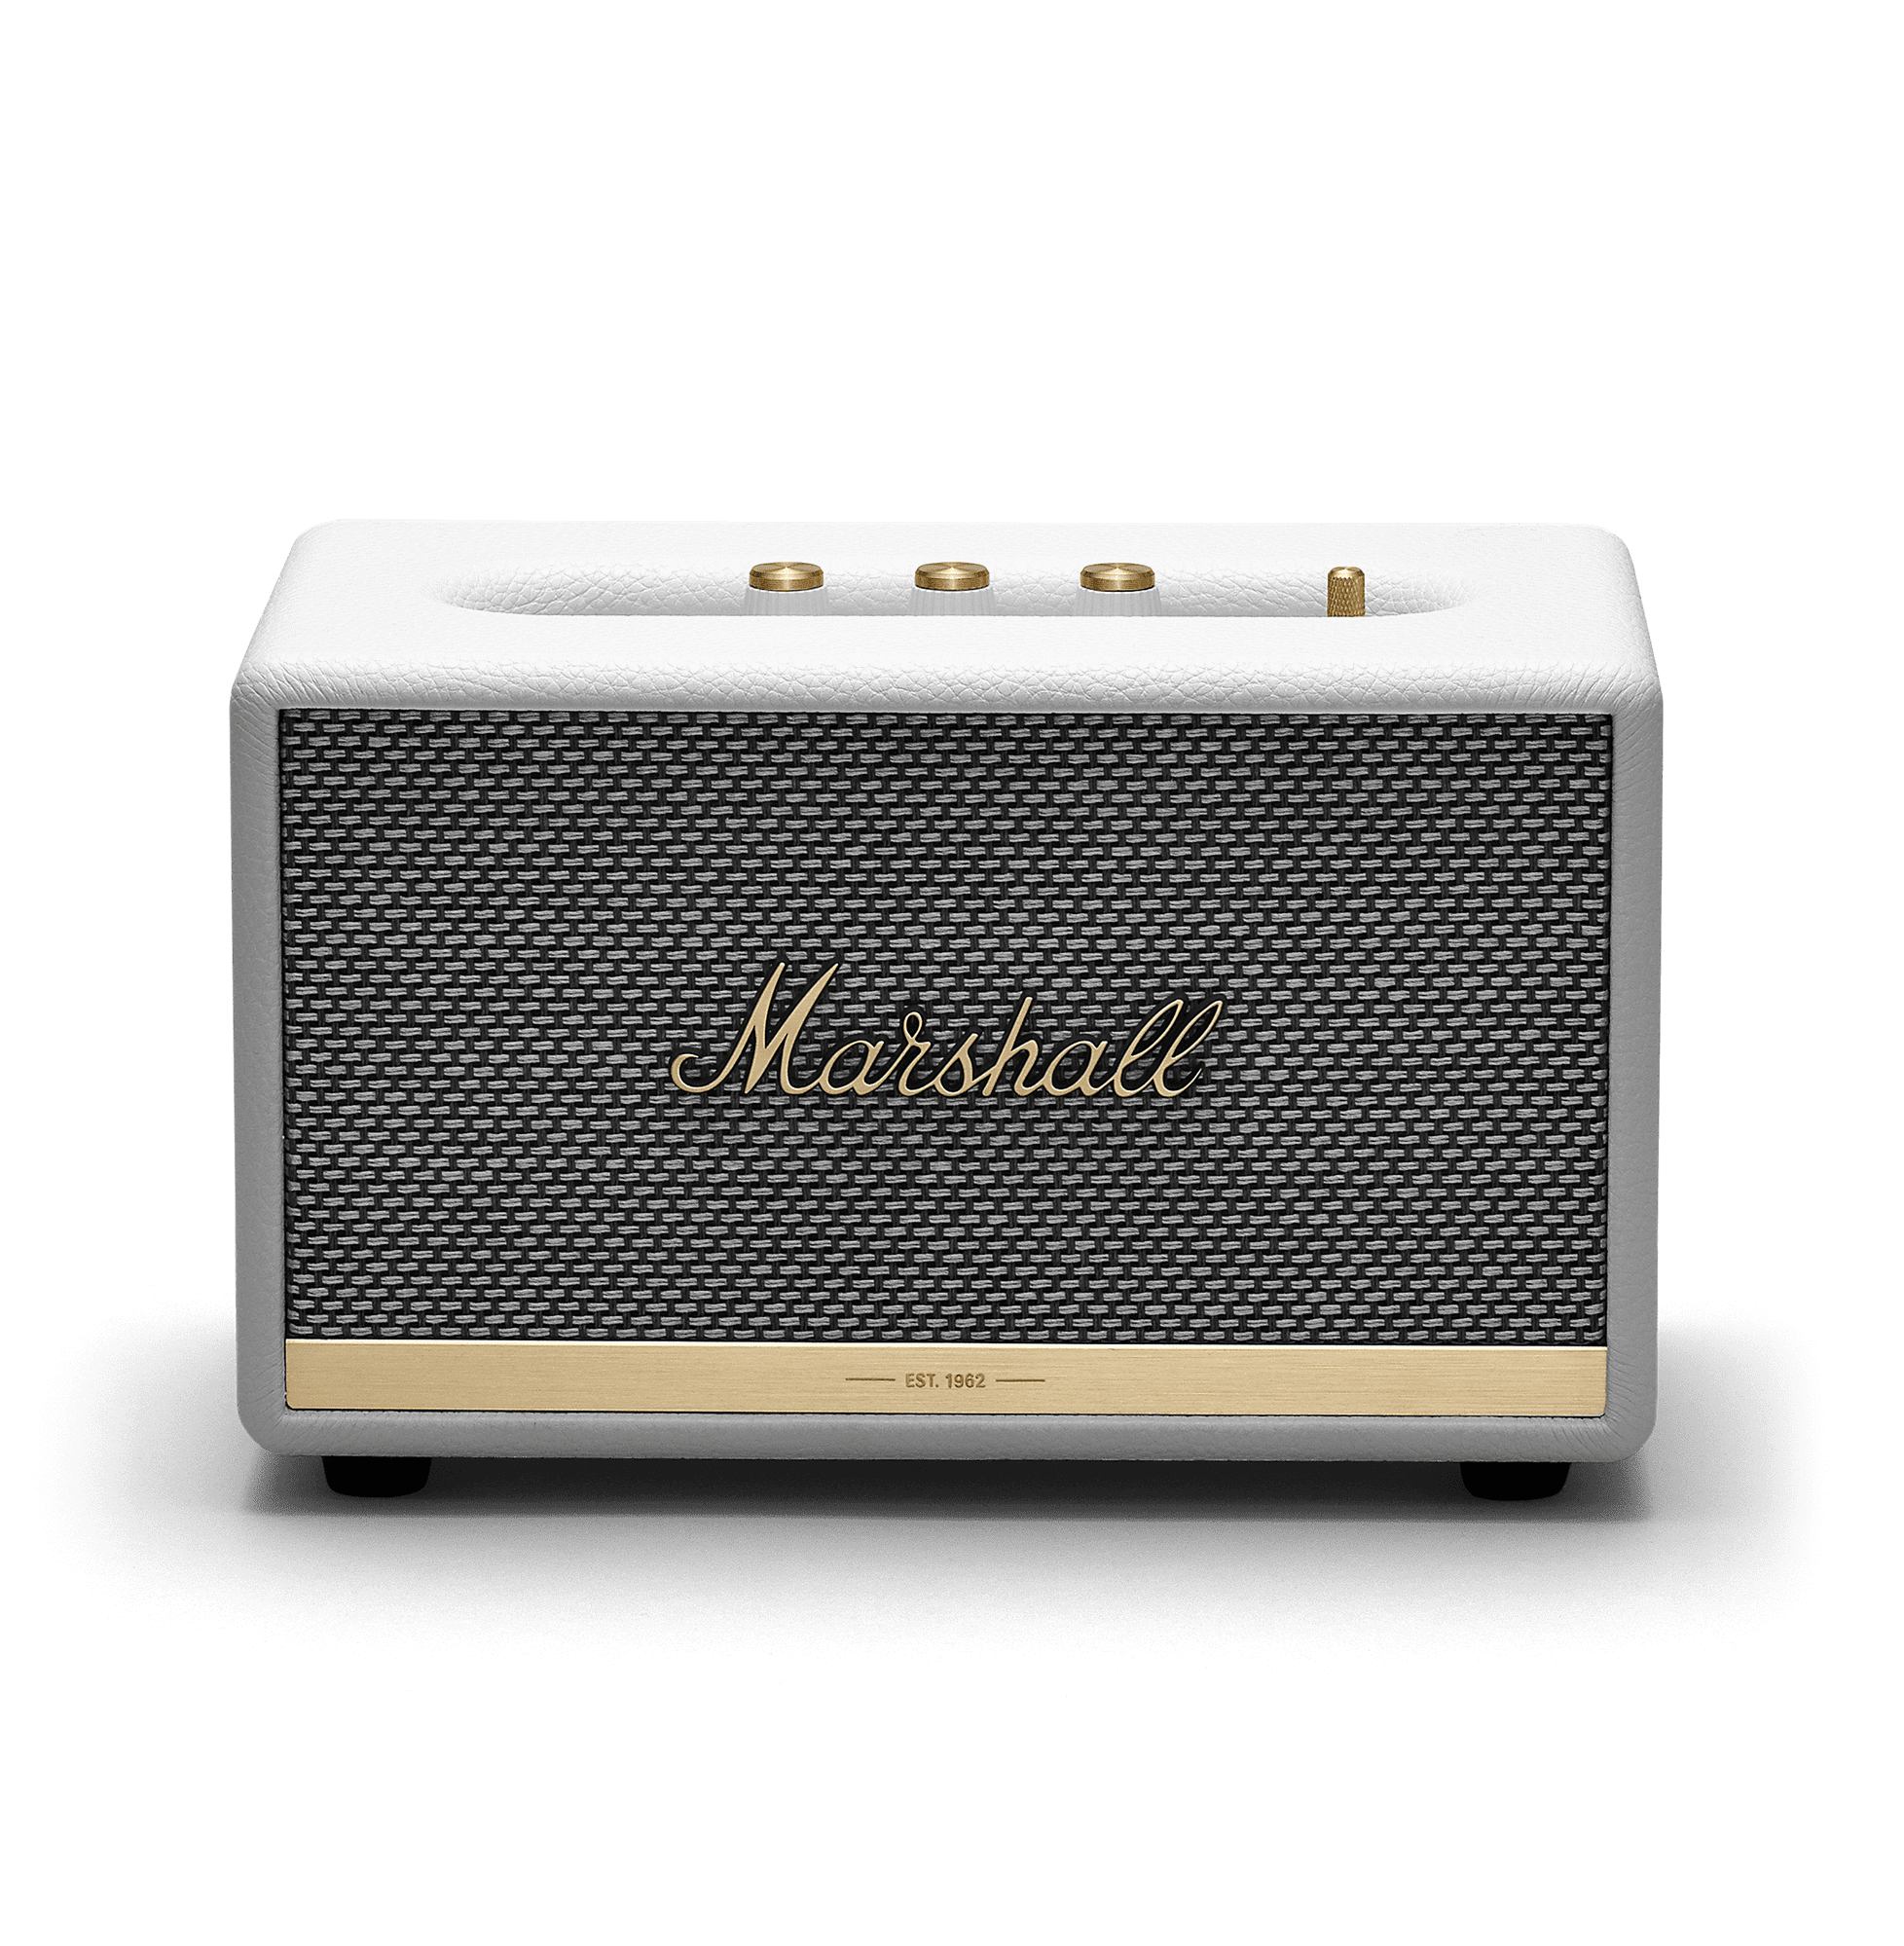 marshall acton review